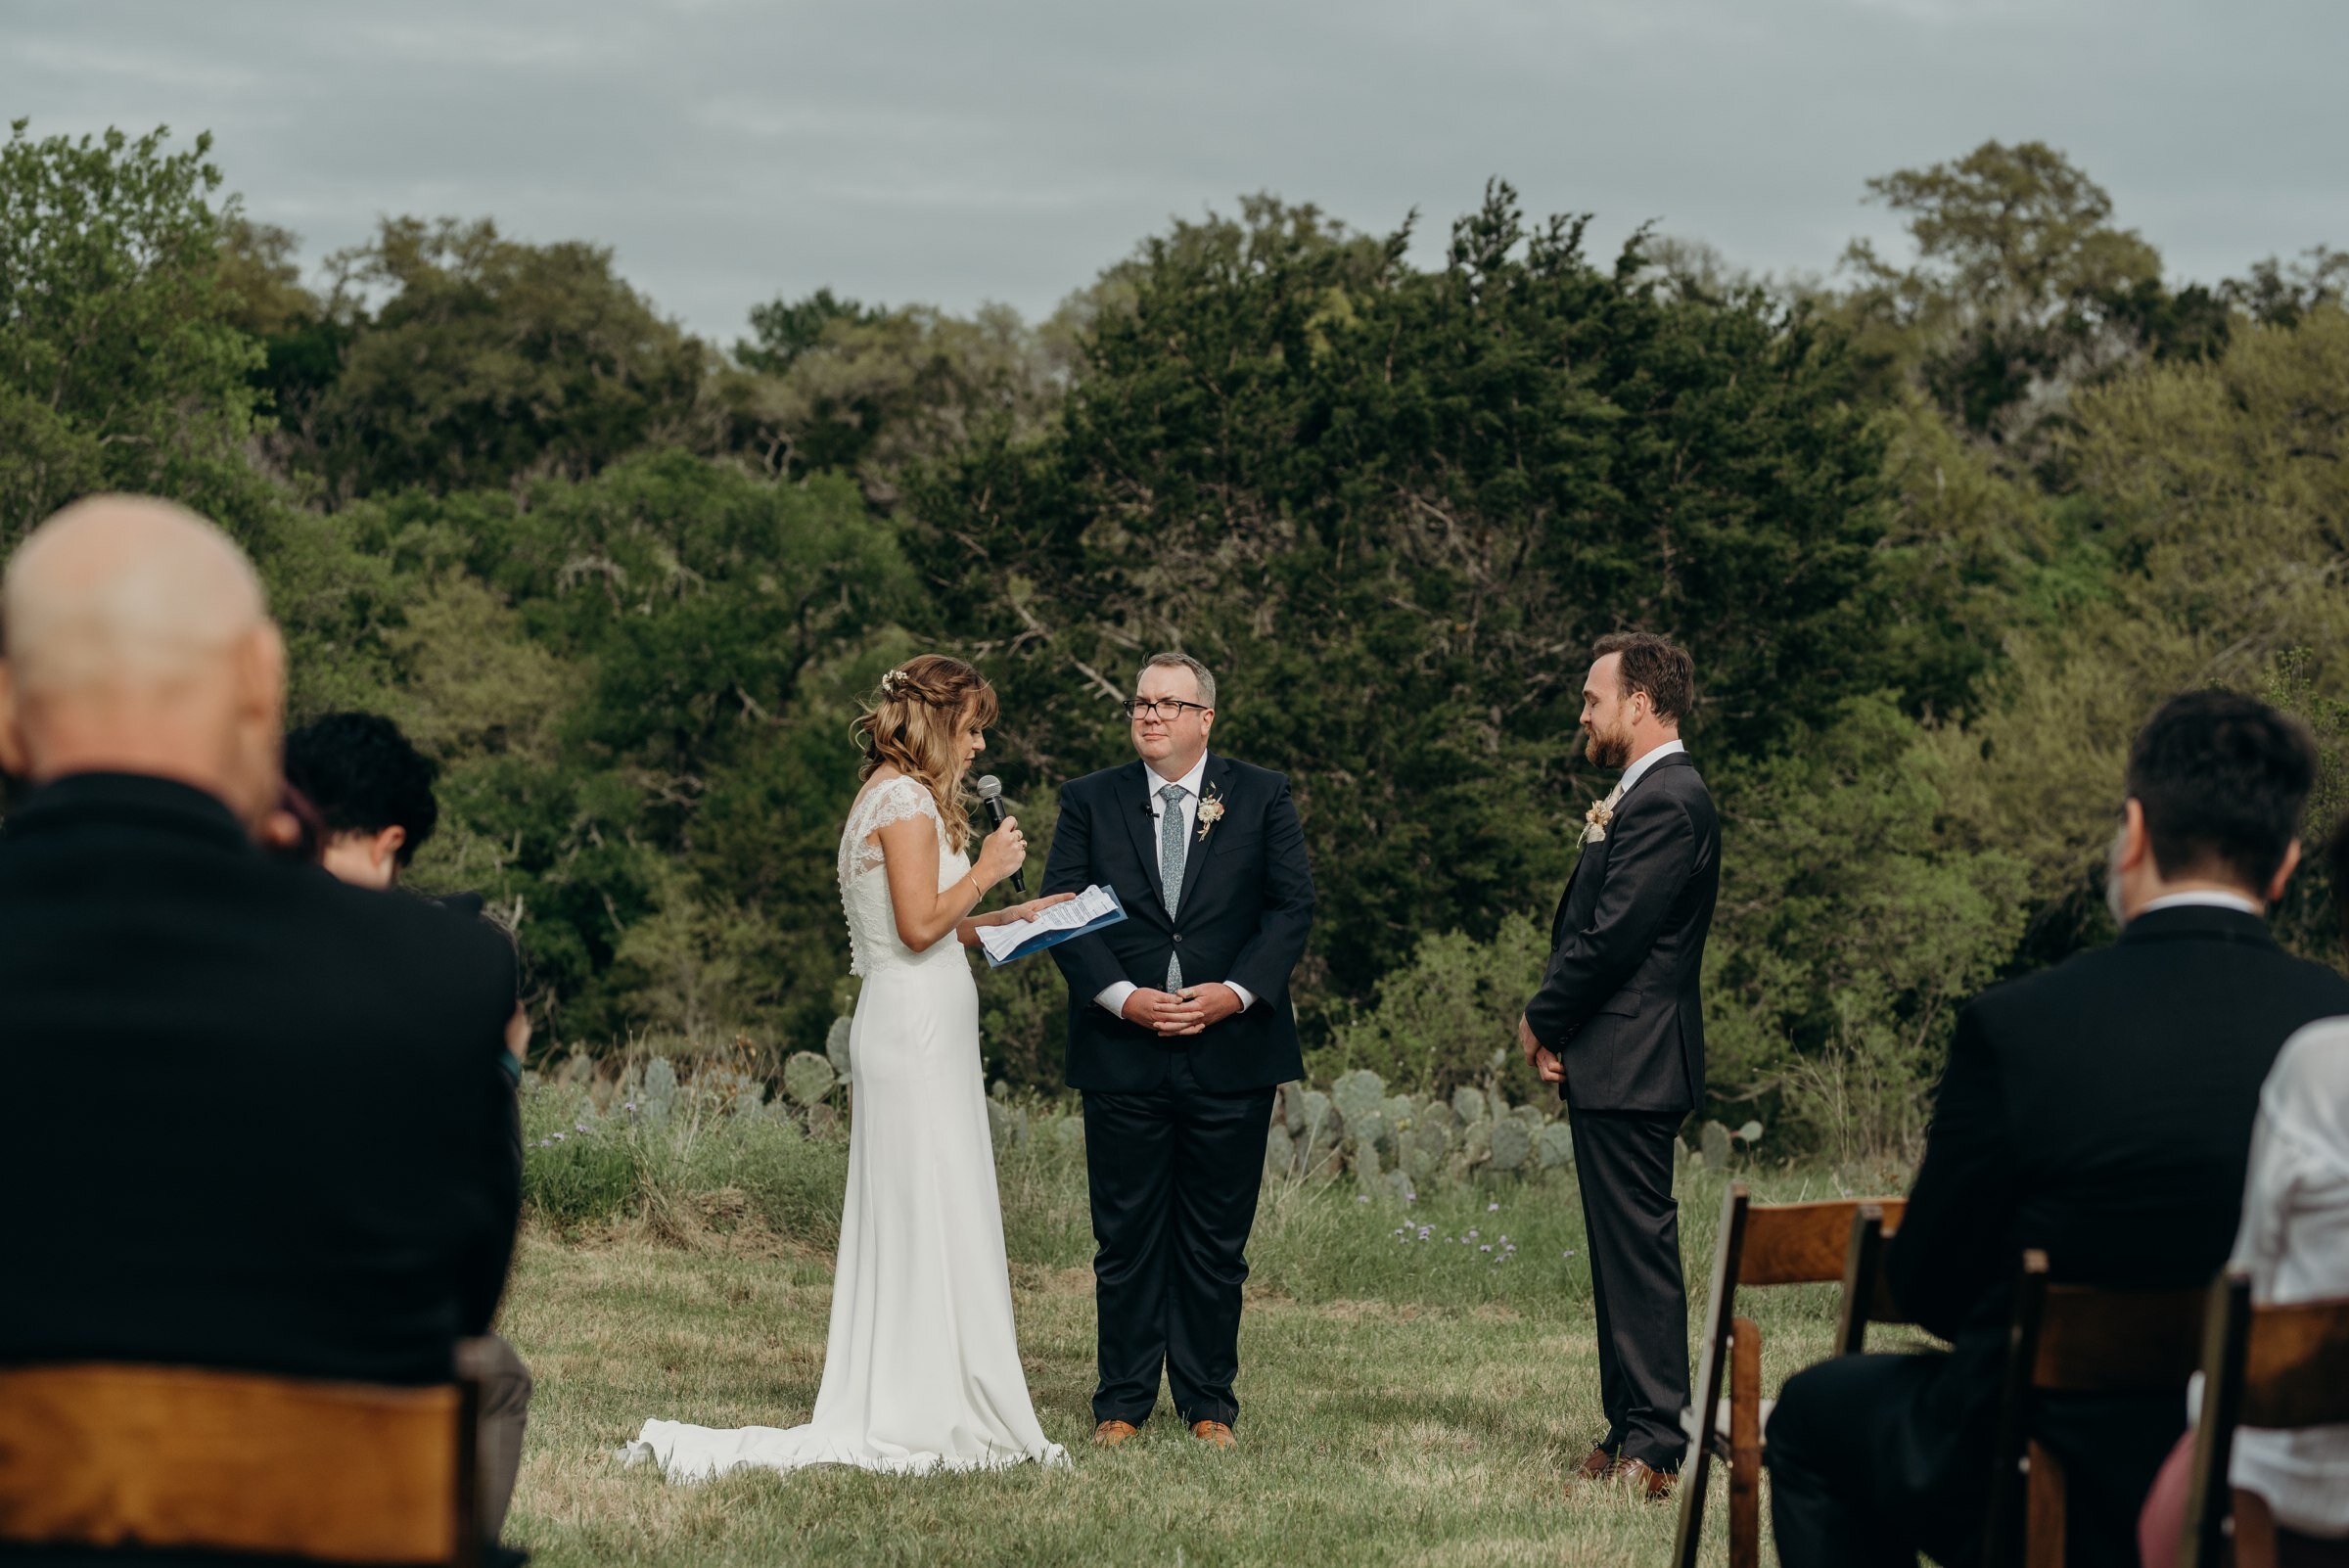  bride and groom exchanging vows wedding ceremony in field plant at kyle wedding venue austin texas 